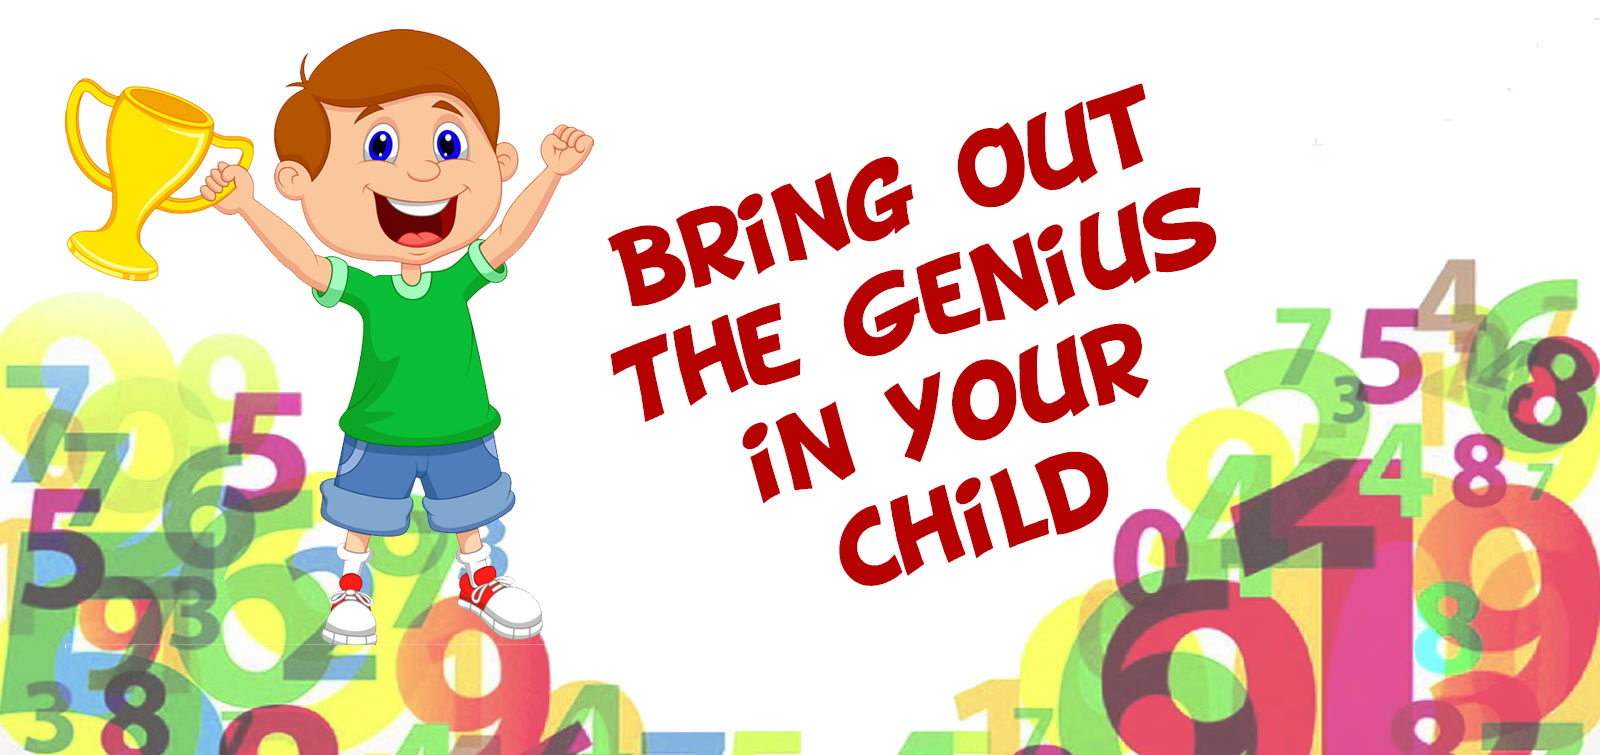 abacus classes gurgaon best mental development center for enhance the children’s intelligence in gurgaon, the best learning time for your child is the age